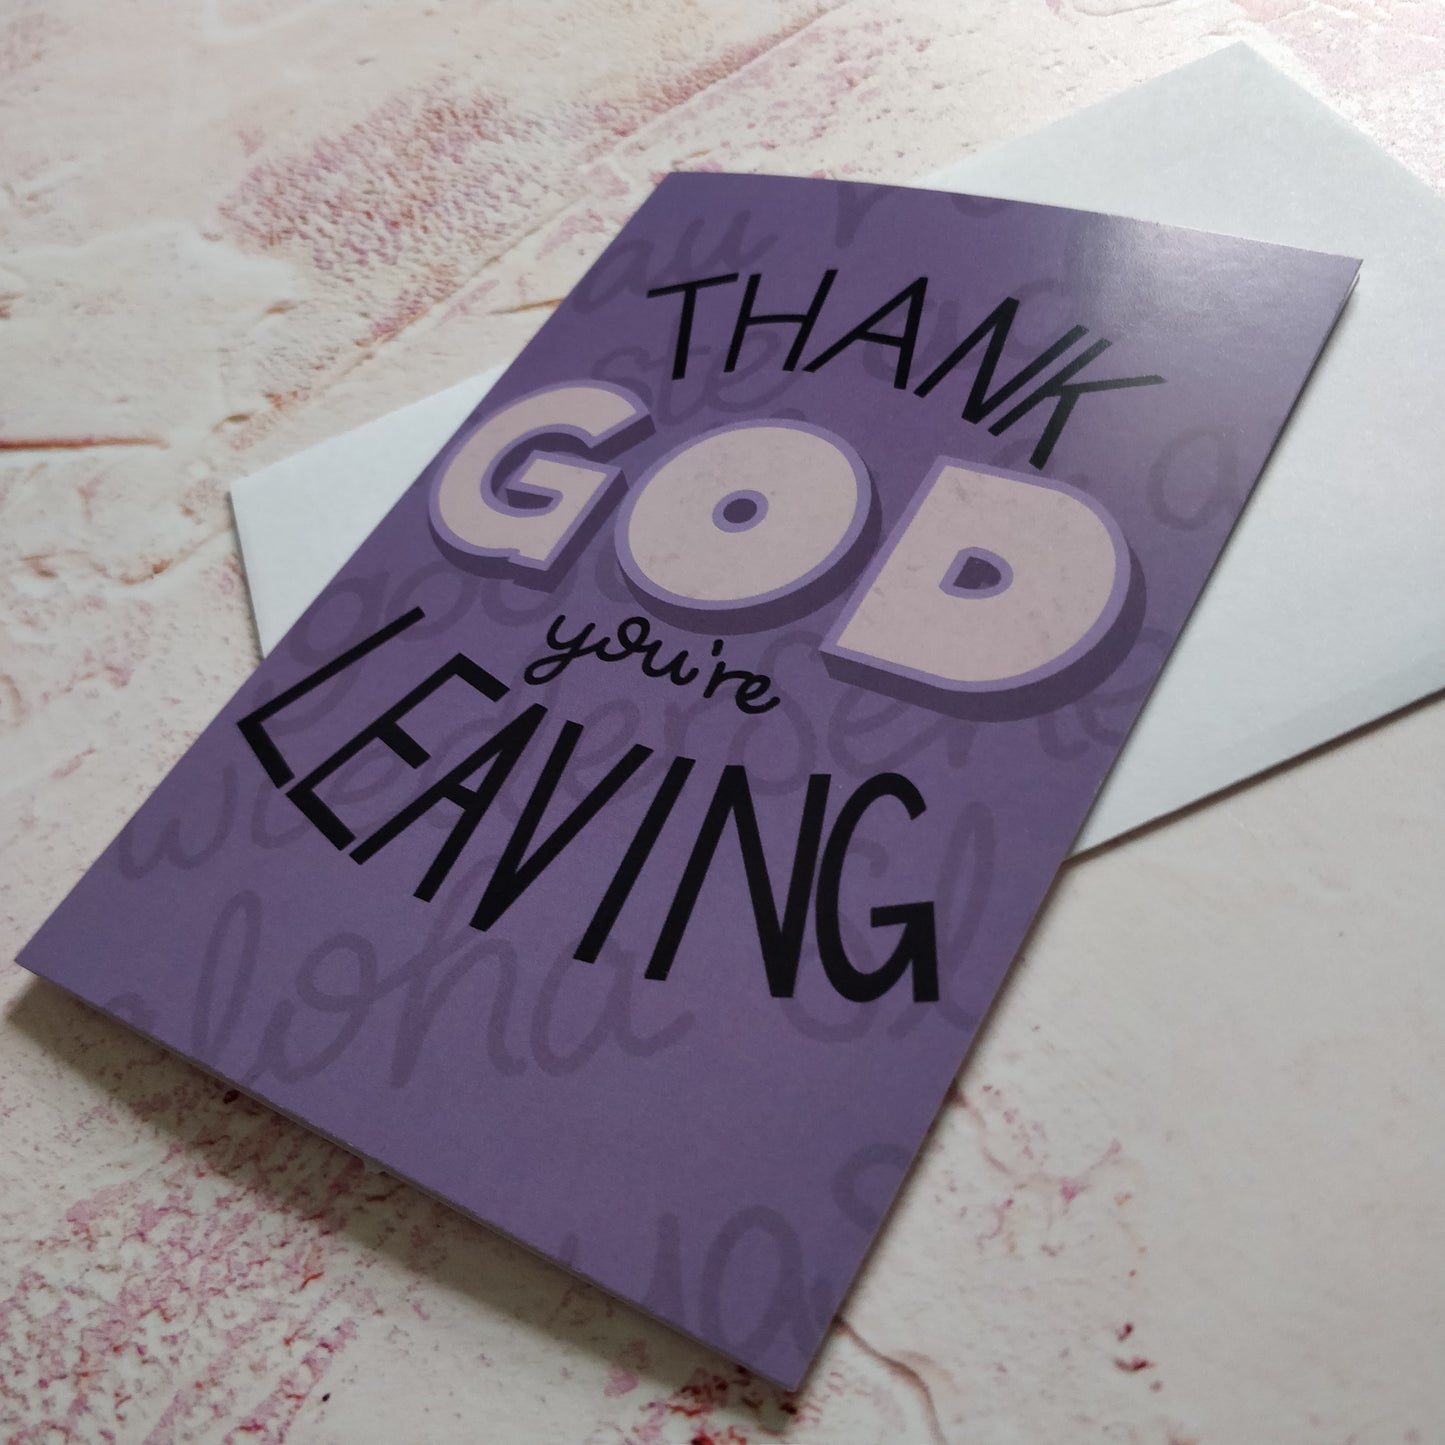 Thank God You're Leaving Greeting Card - Fay Dixon Design